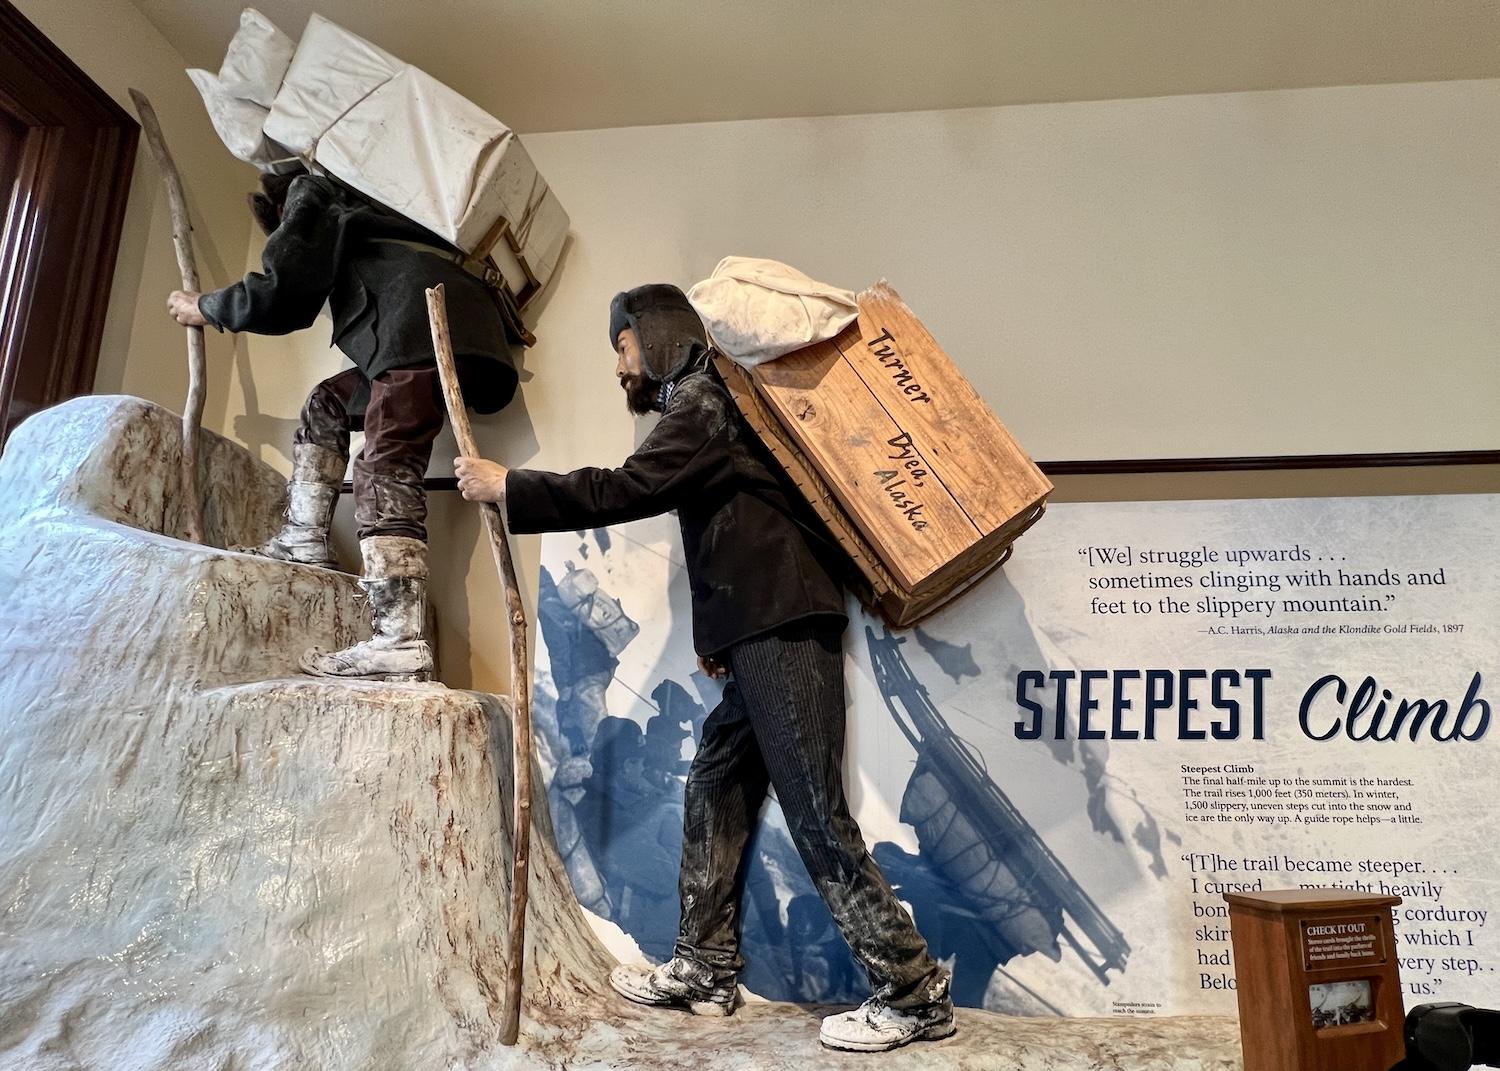 In the NPS visitor center museum in Skagway, an exhibit conveys how gold rush stampeders had to carry heavy loads through extreme Alaska weather.